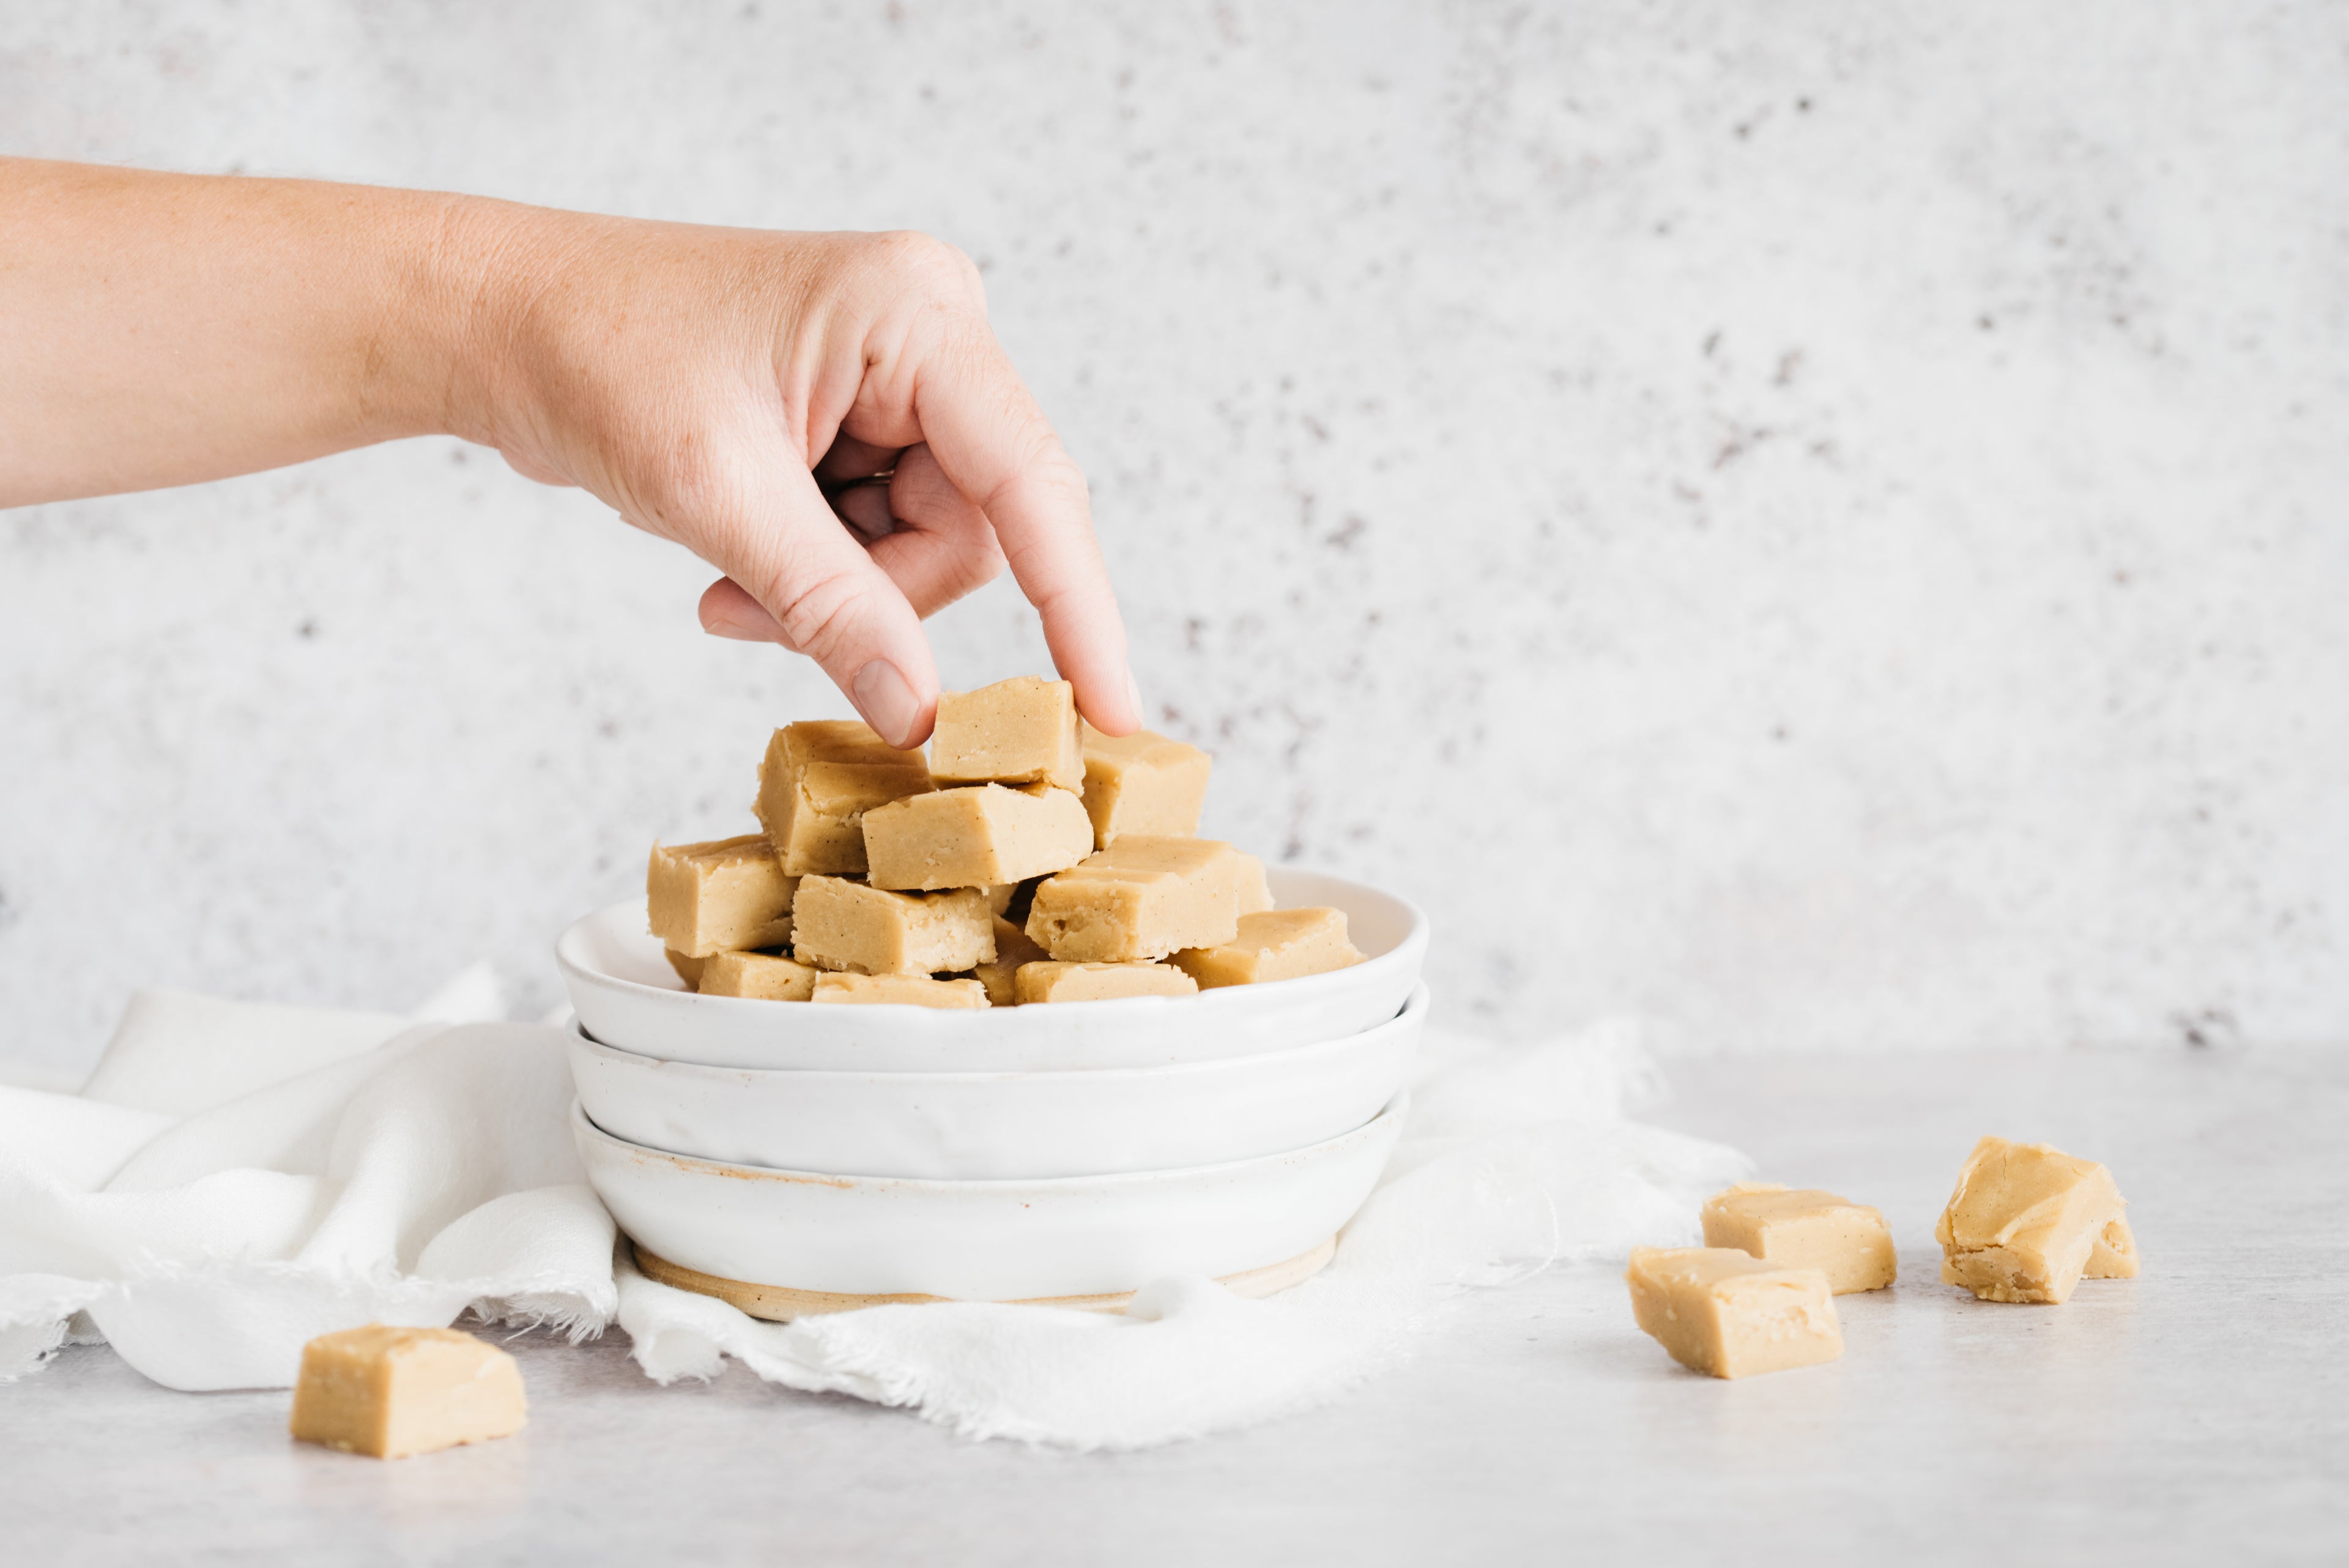 White bowl full of cubes of vanilla fudge. Hand reaching in to take one. 4 cubes of fudge in foreground